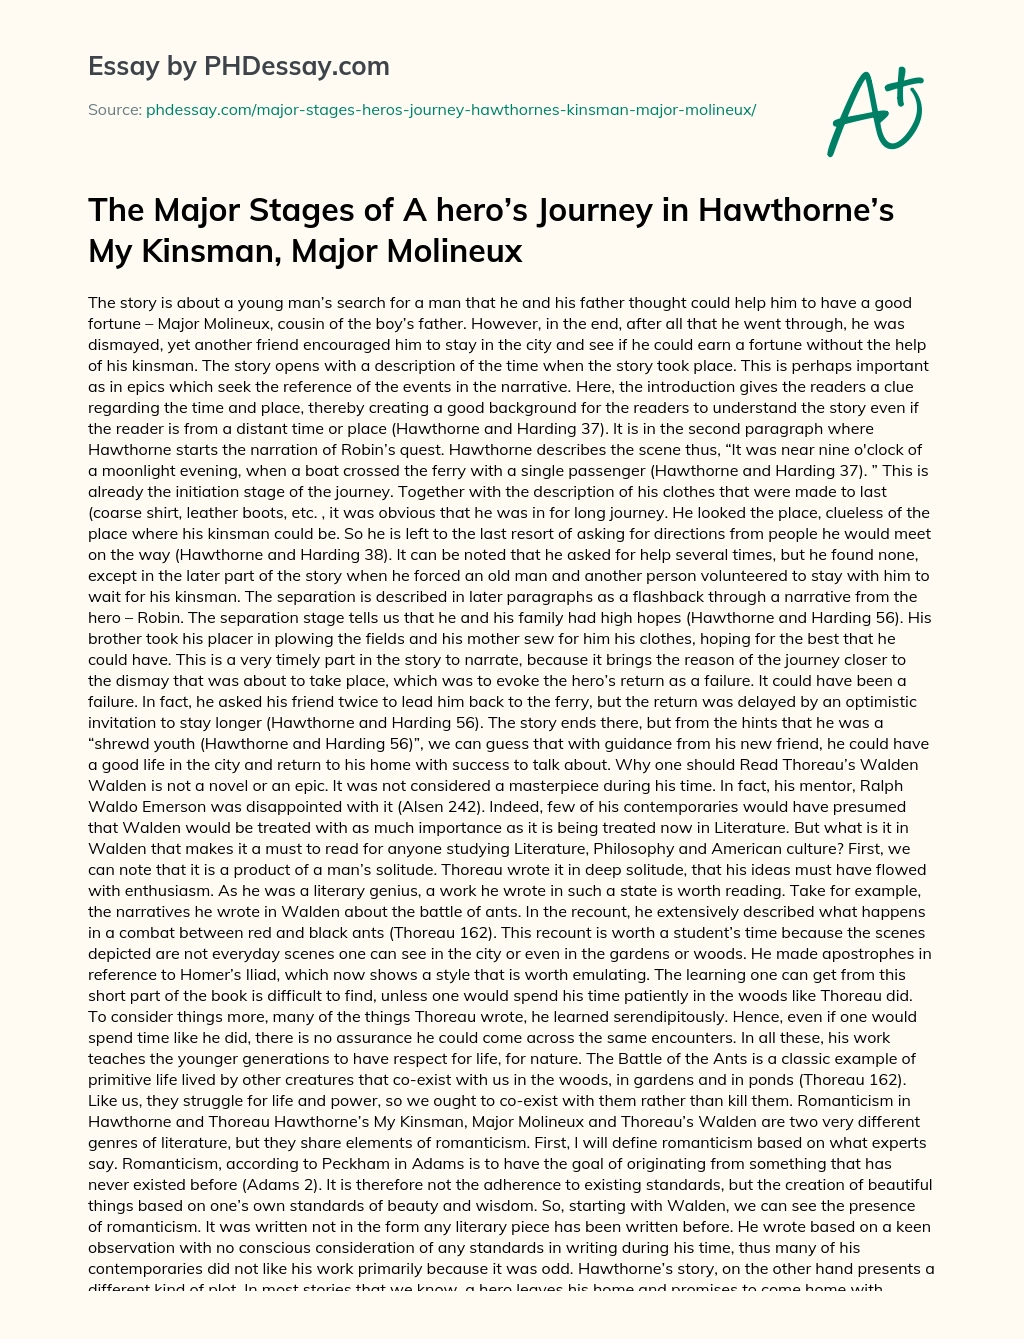 The Major Stages of A hero’s Journey in Hawthorne’s My Kinsman, Major Molineux essay